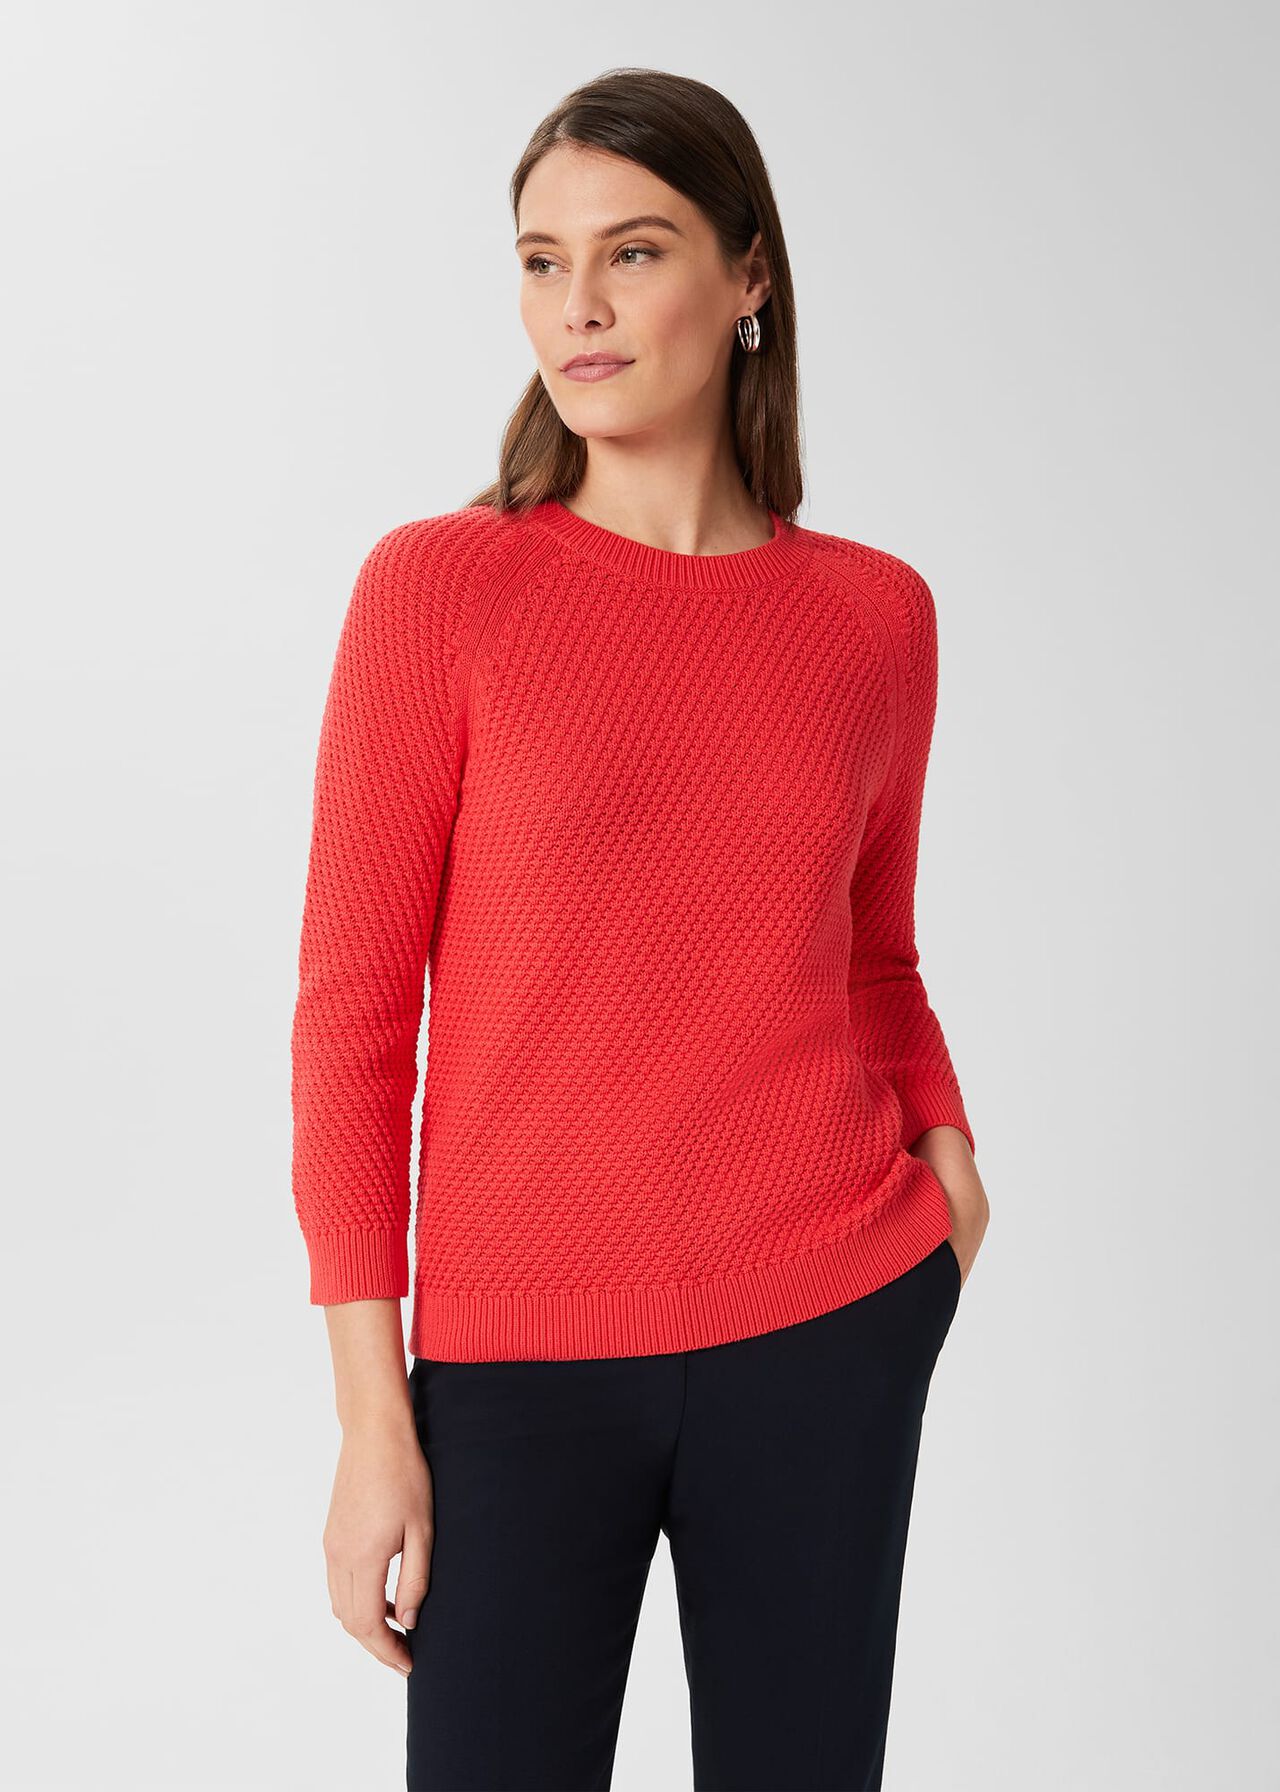 Lucie Cotton Sweater , Deep Coral, hi-res